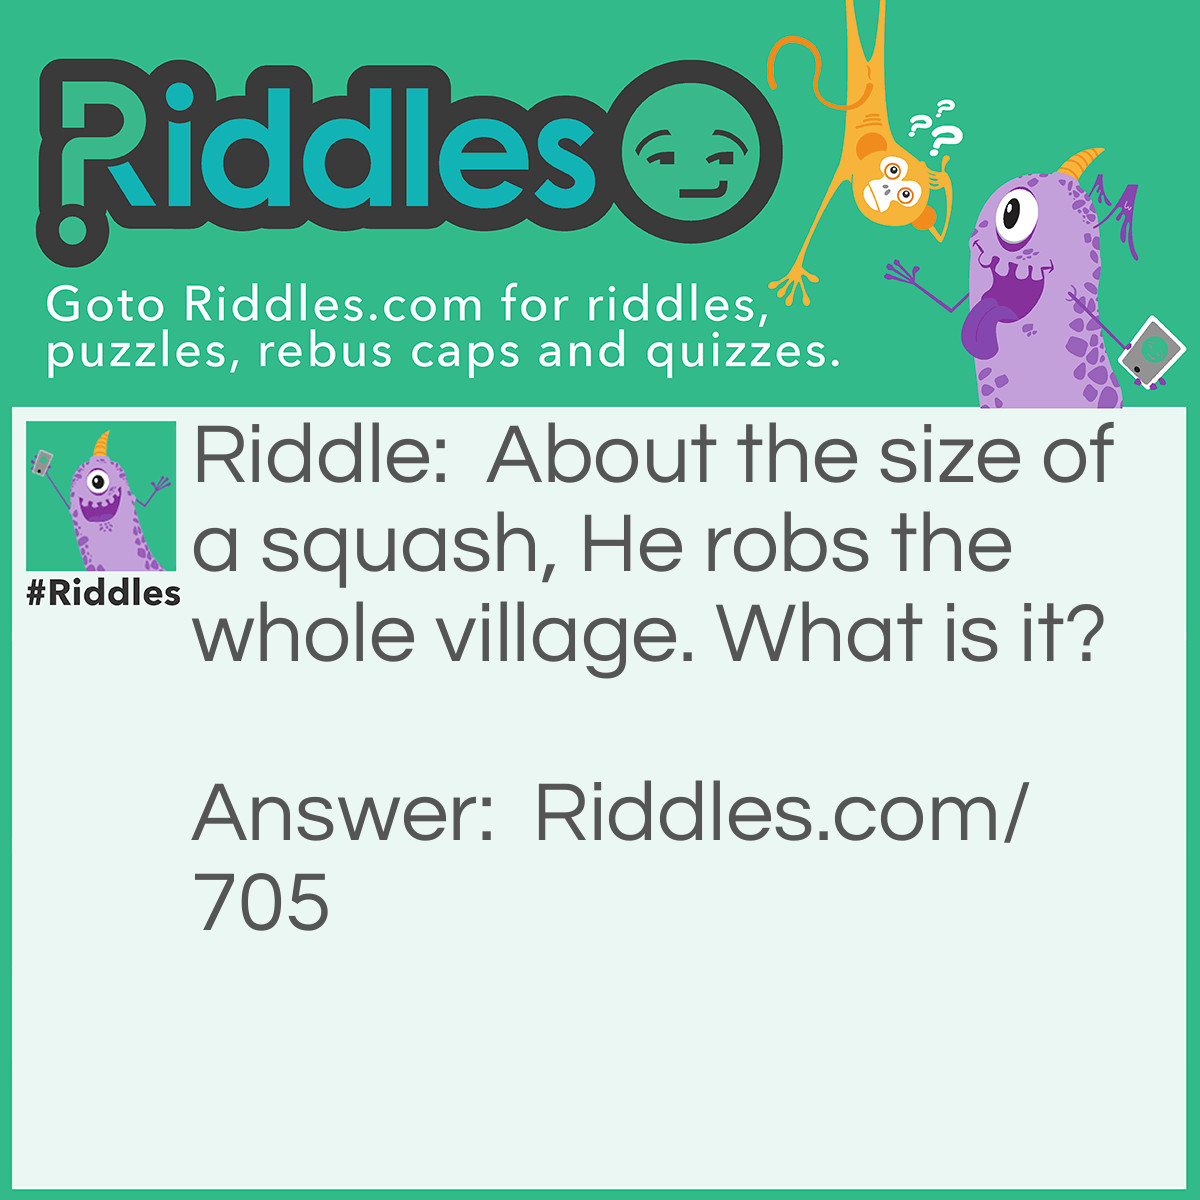 Riddle: About the size of a squash, He robs the whole village. What is it? Answer: A rat.